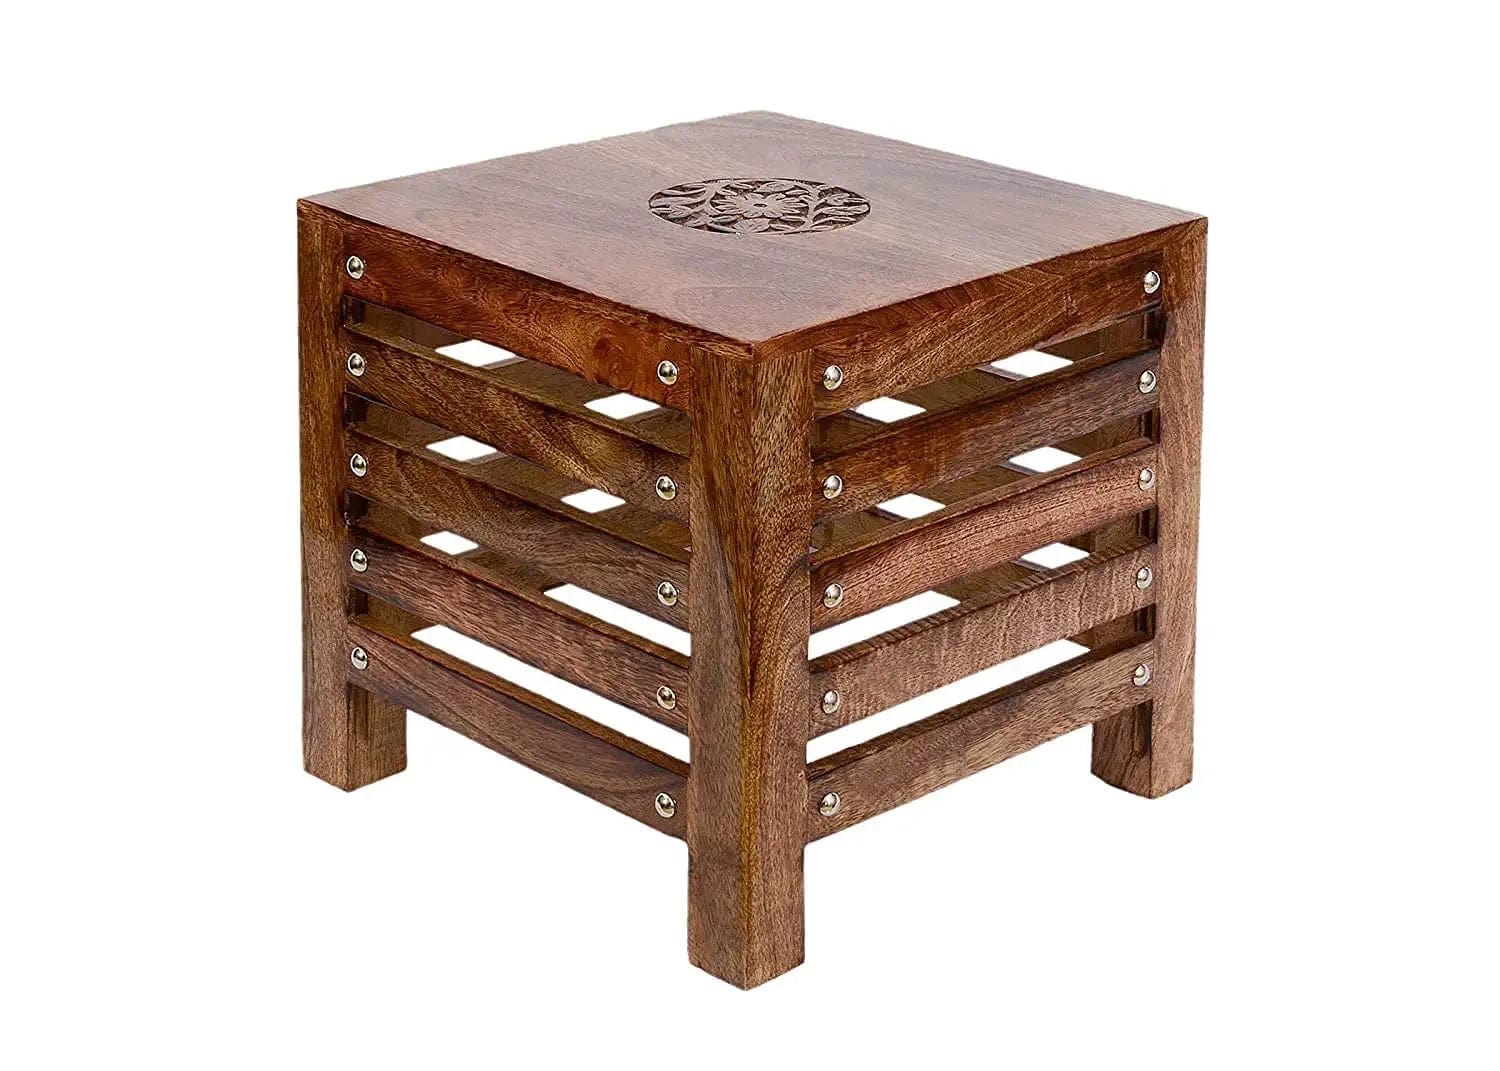 Wooden Beautiful Handmade Stool | Table | for Office | Home Furniture | Outdoor | Décor - Brown(1)